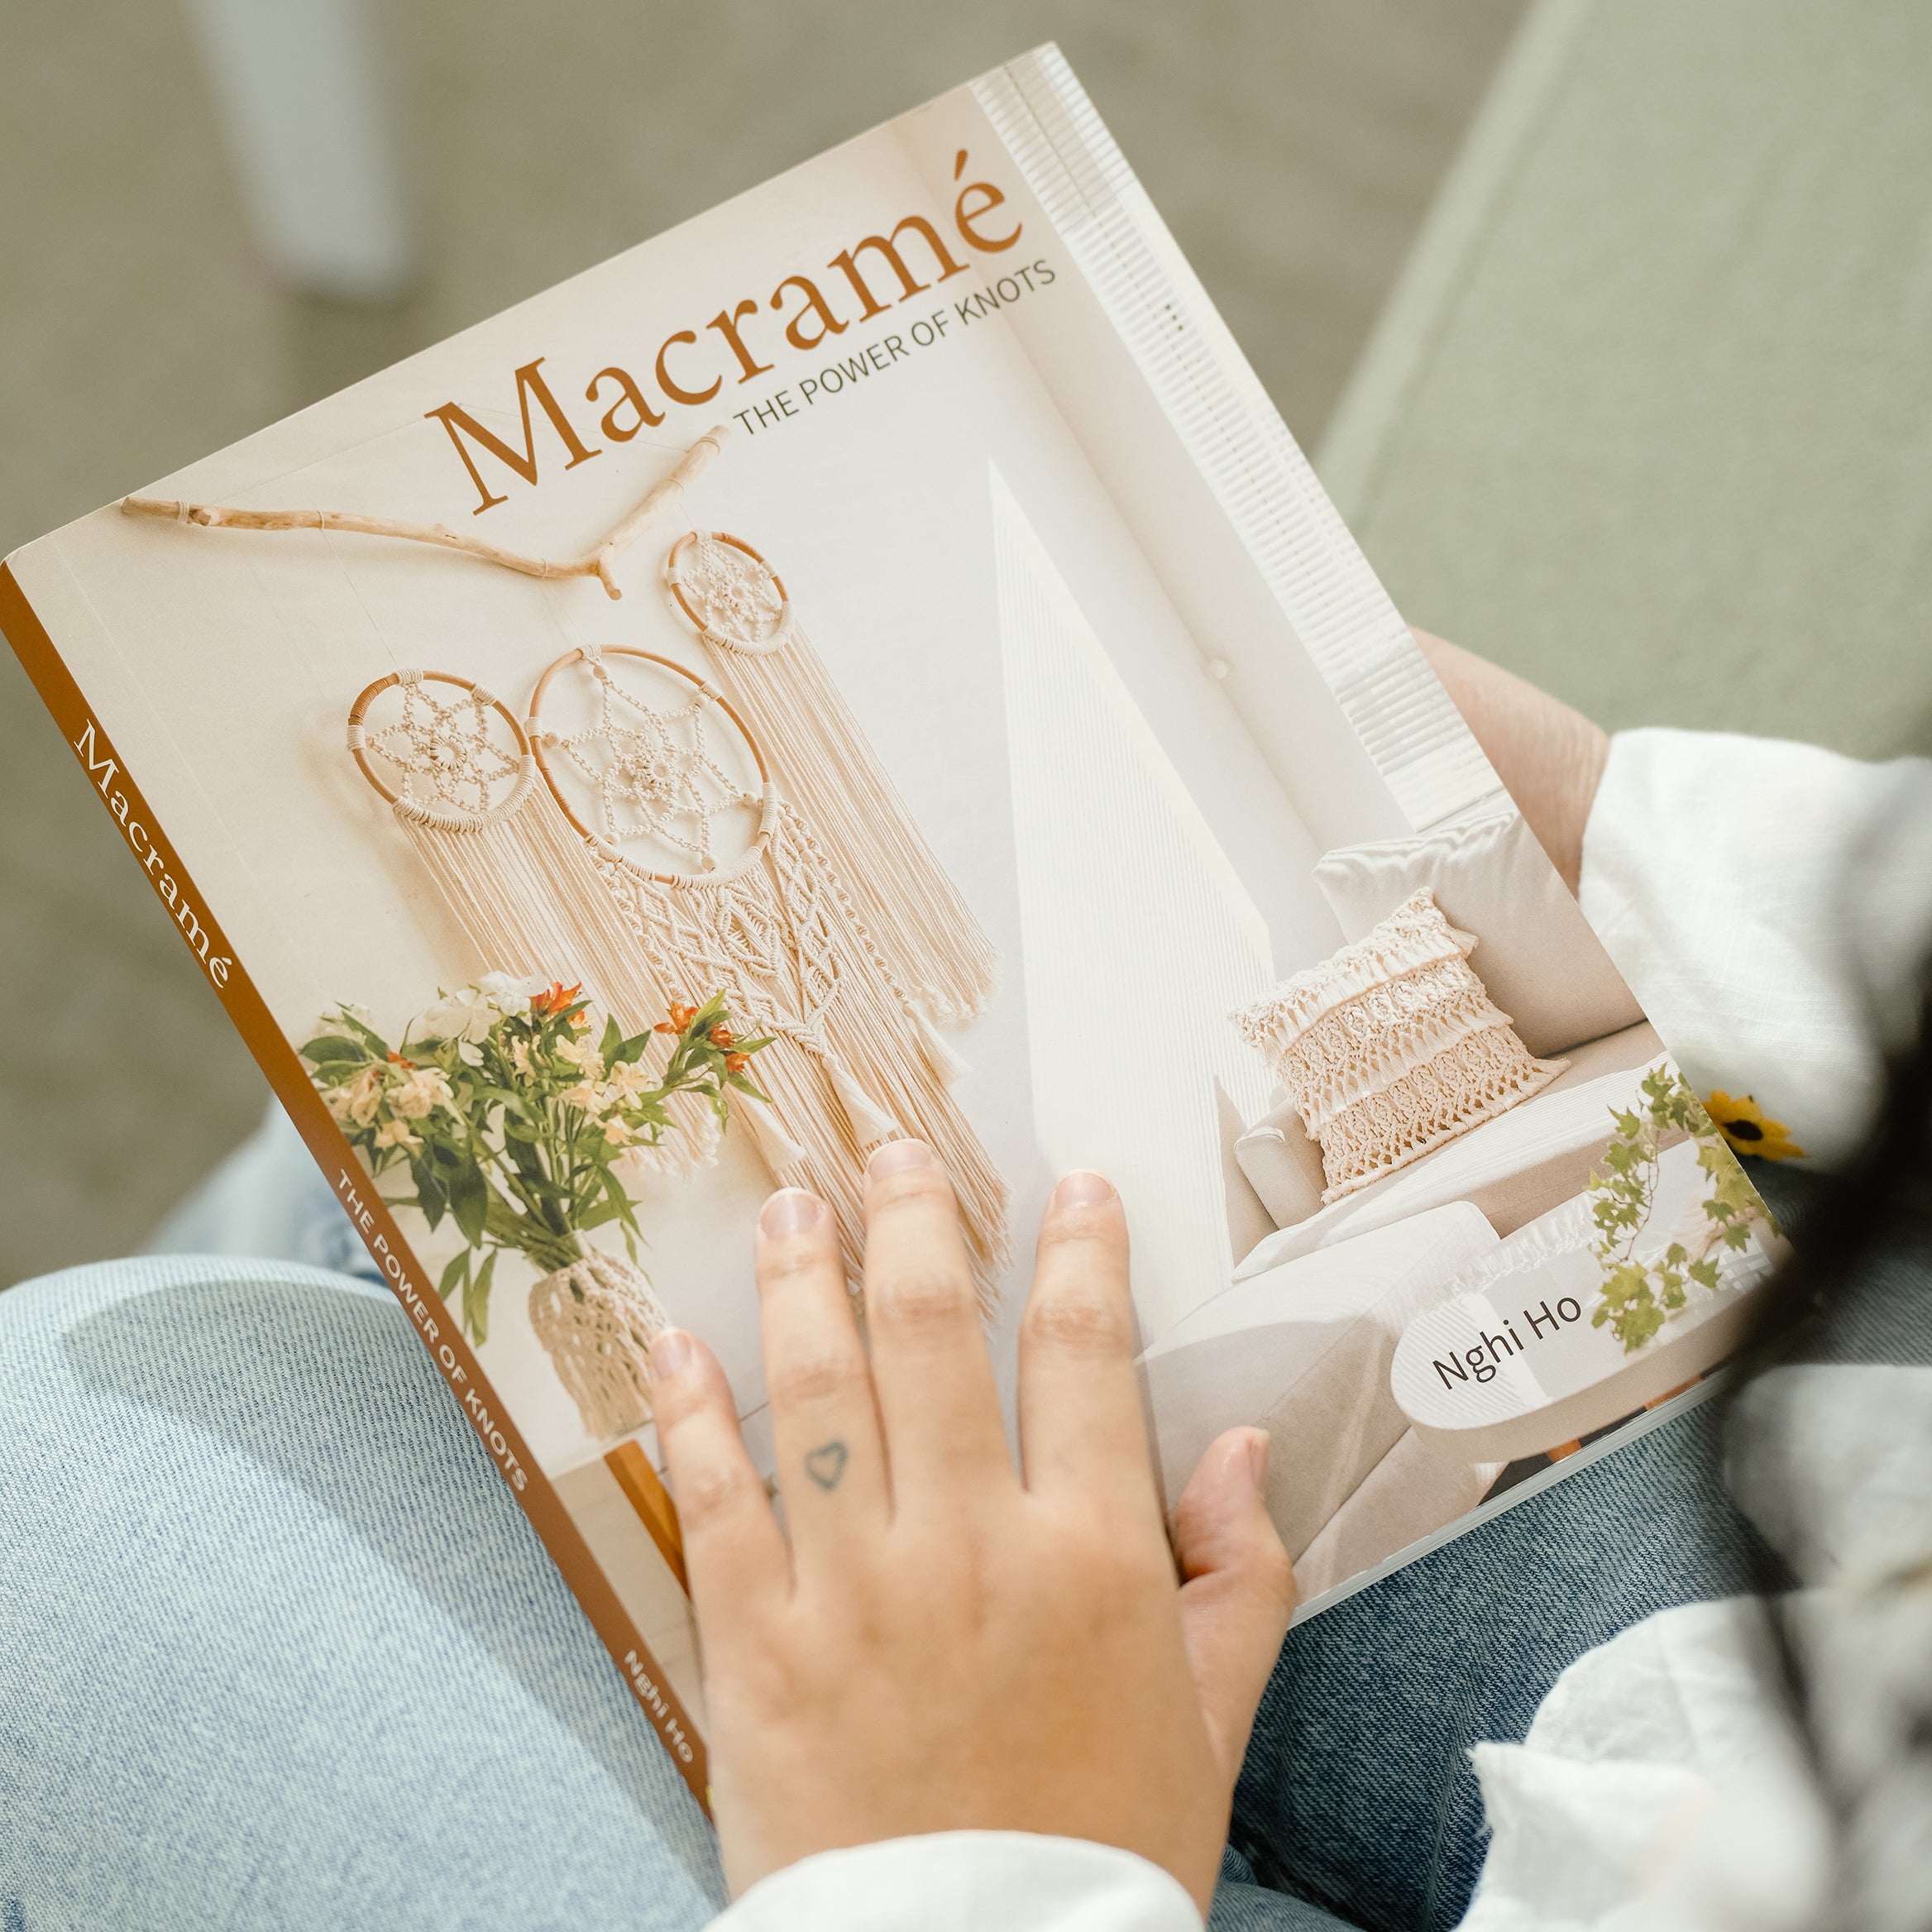 Macrame: The Power of Knots (Macramè Techniques and Projects for Beginners to Experts) Paperback